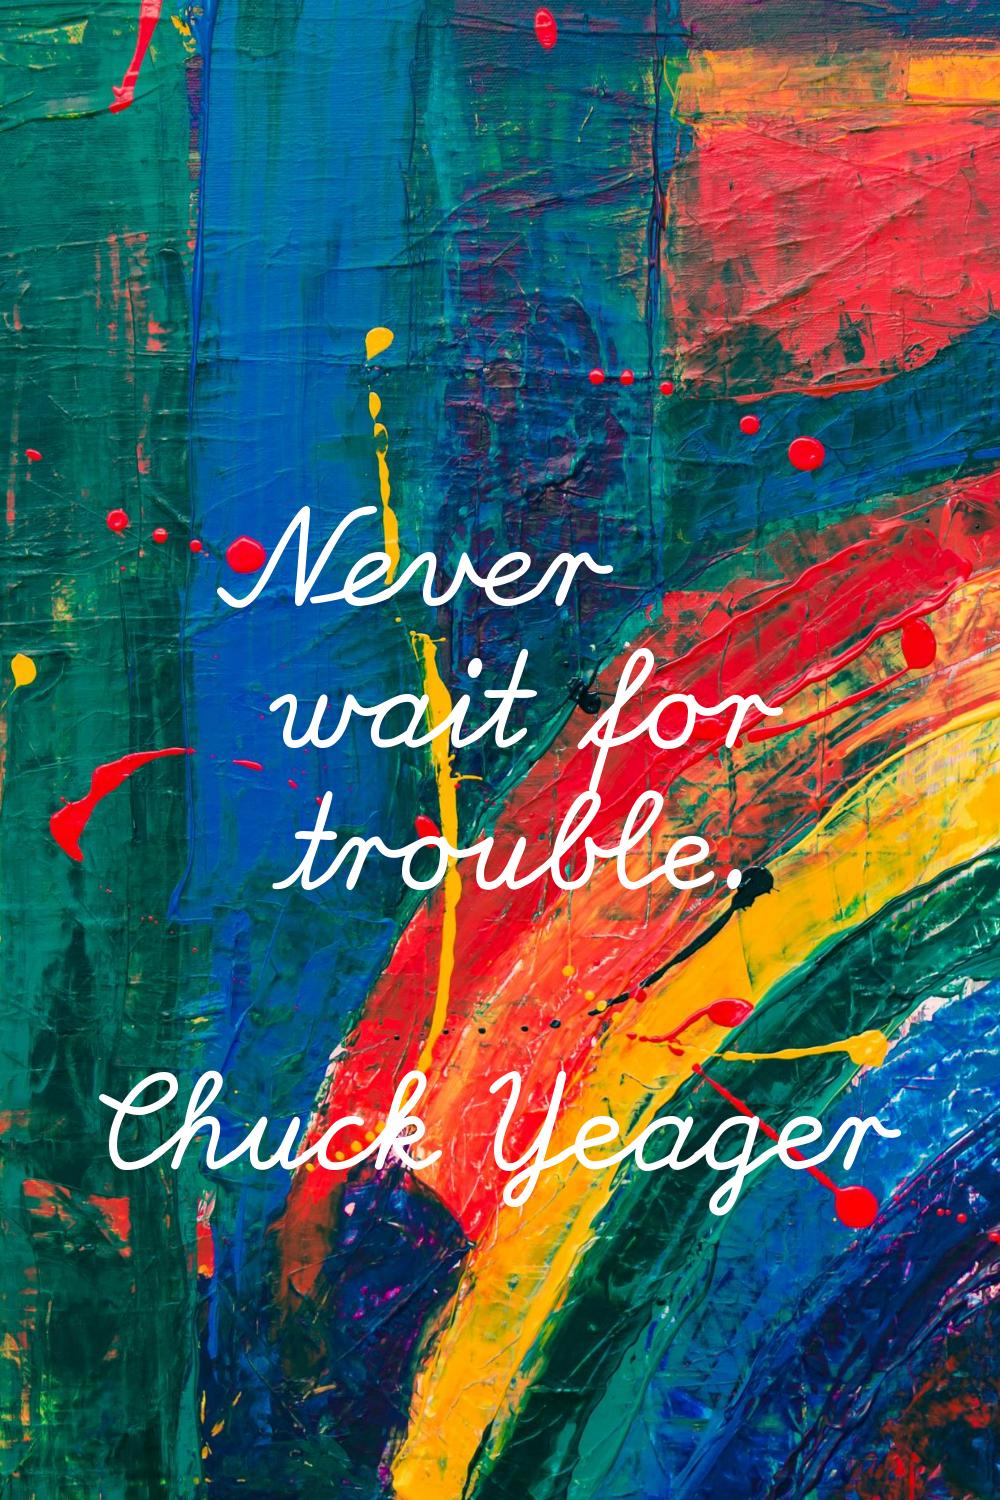 Never wait for trouble.